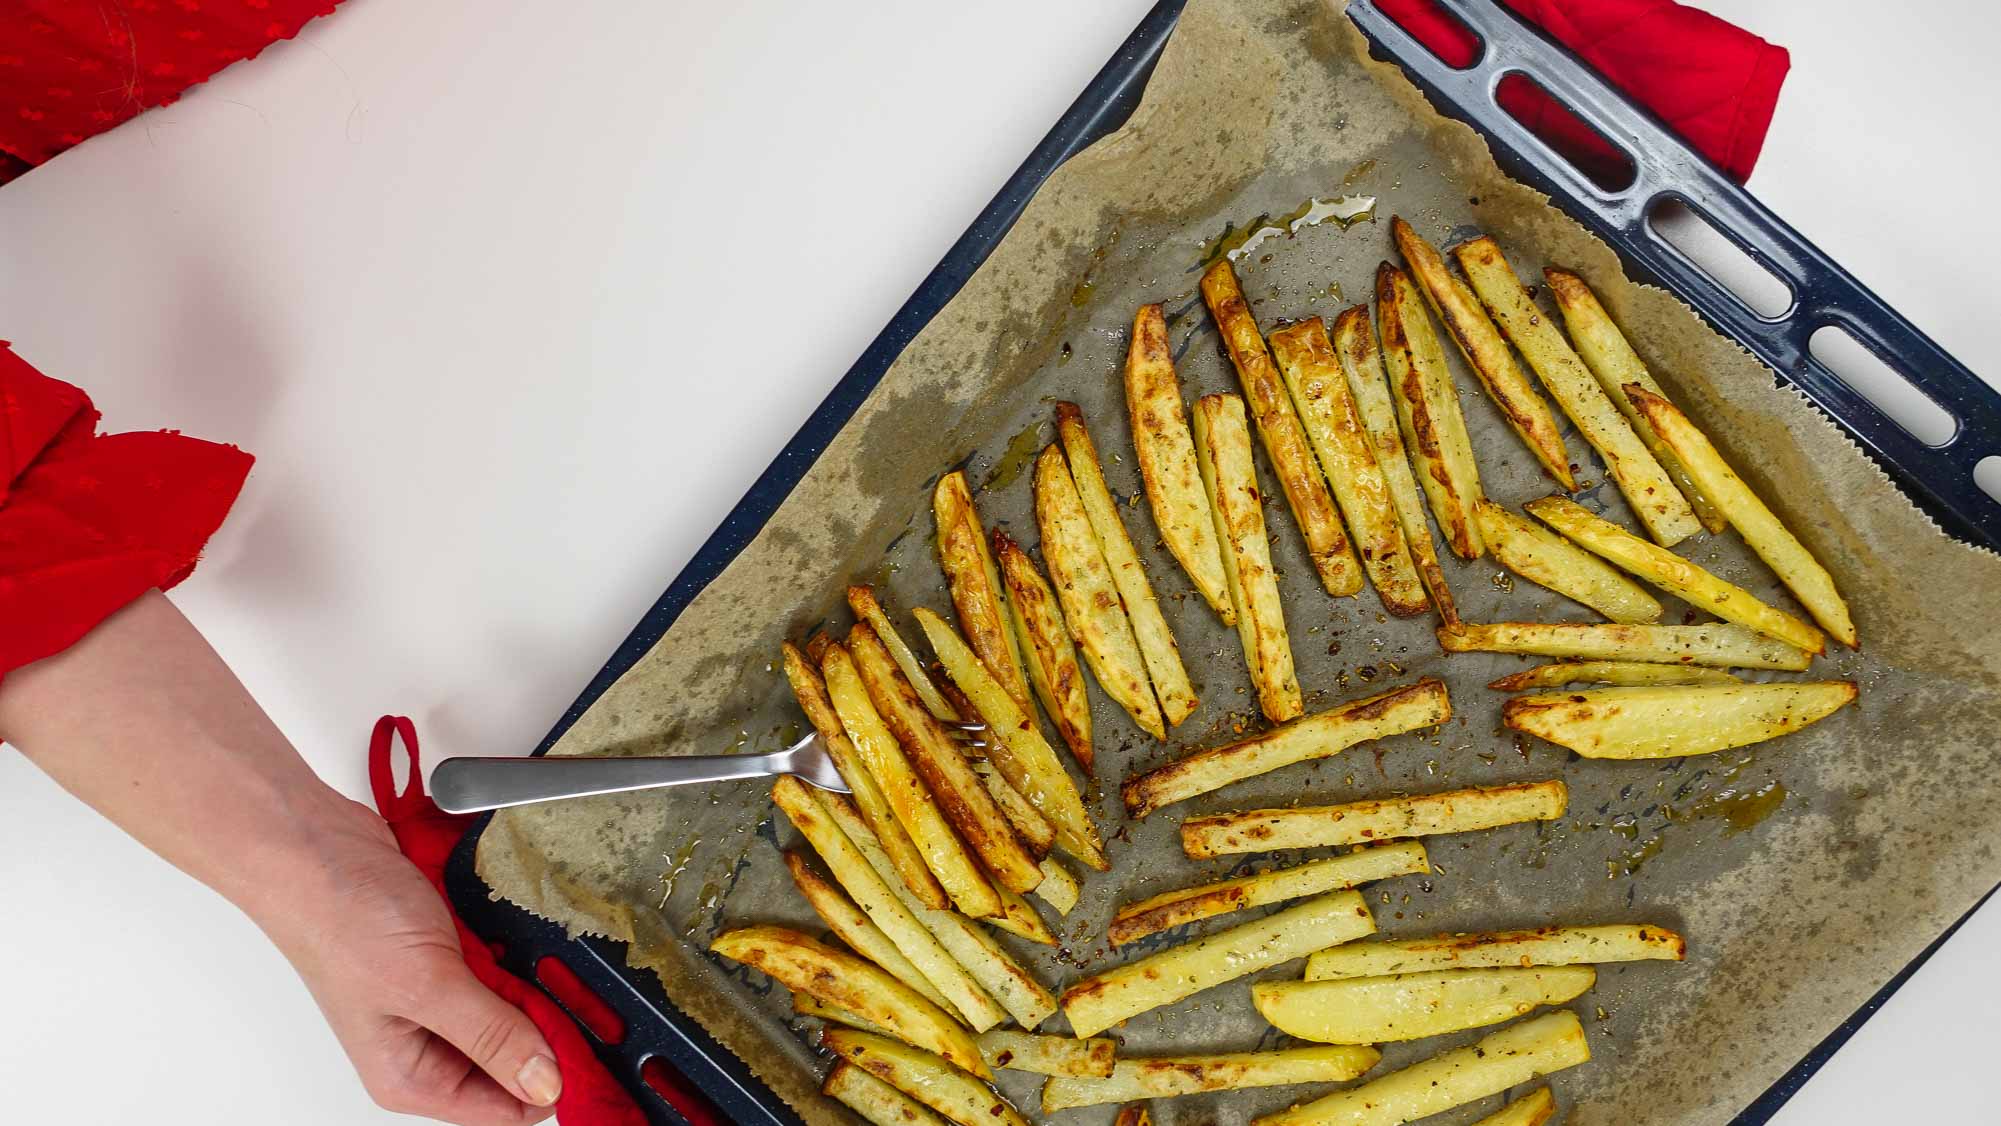 Holding a tray with potatoes just cooked from the oven.